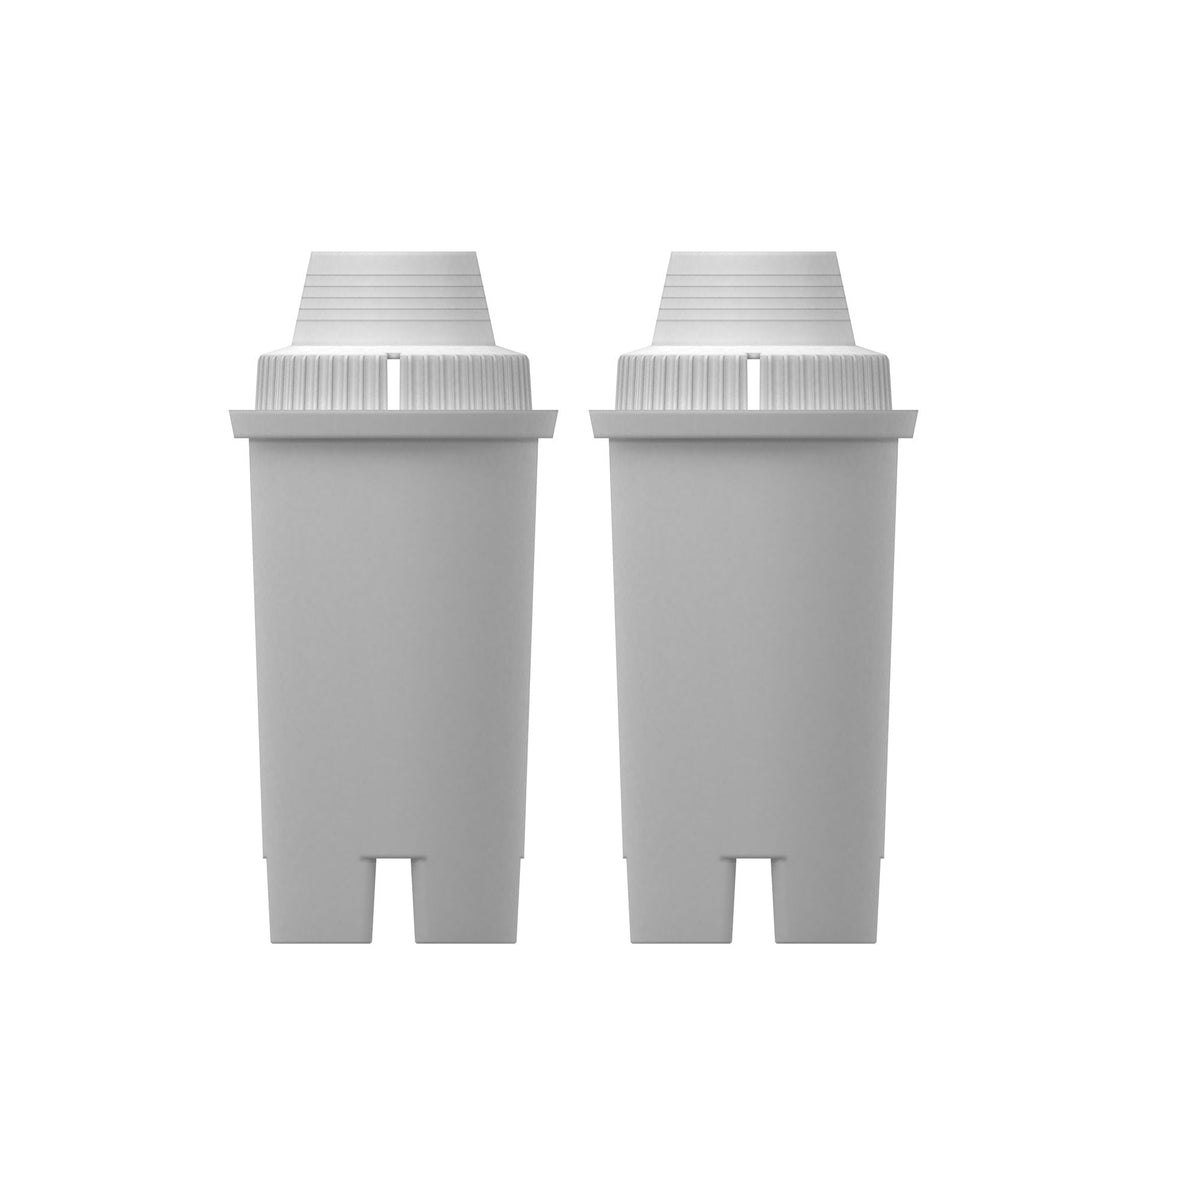 Replacement Alkaline Filters for Drinkpod Pitchers and Dispensers- 4 Pack